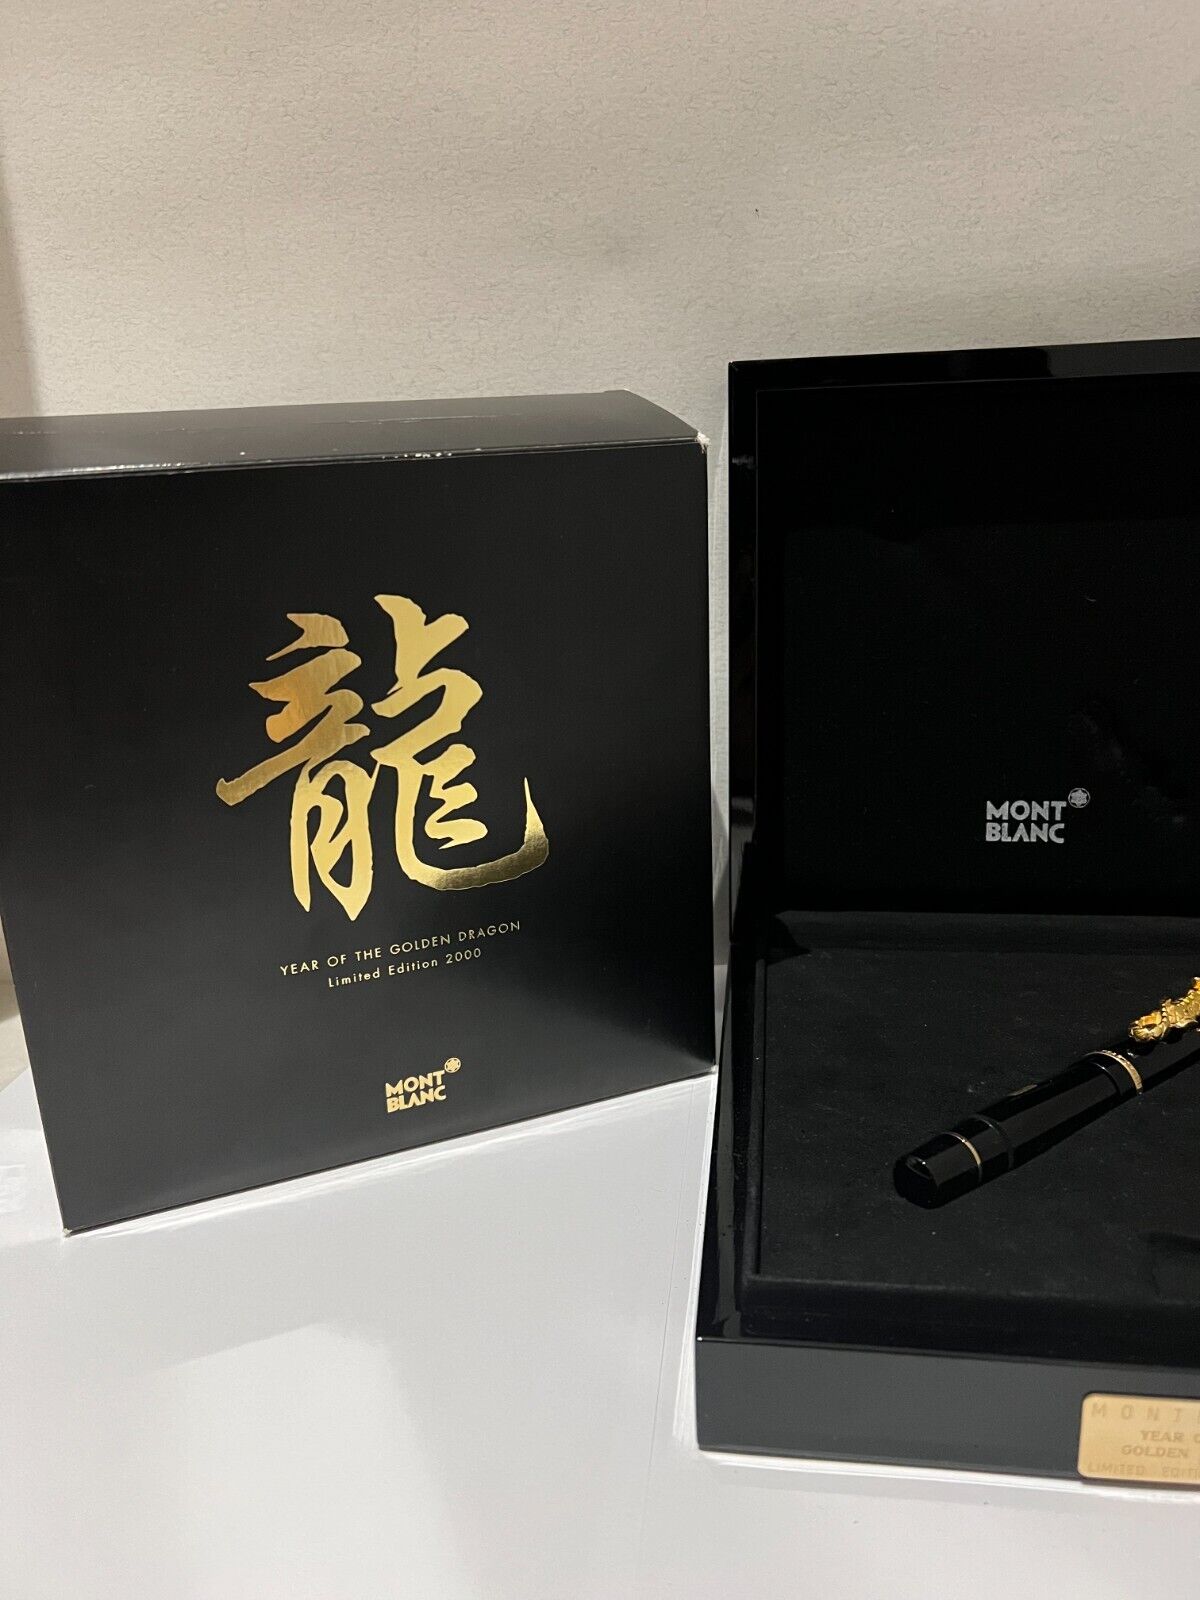 MontBlanc Year of the golden Dragon Fountain Pen # 1292/2000 - New(no paperwork)